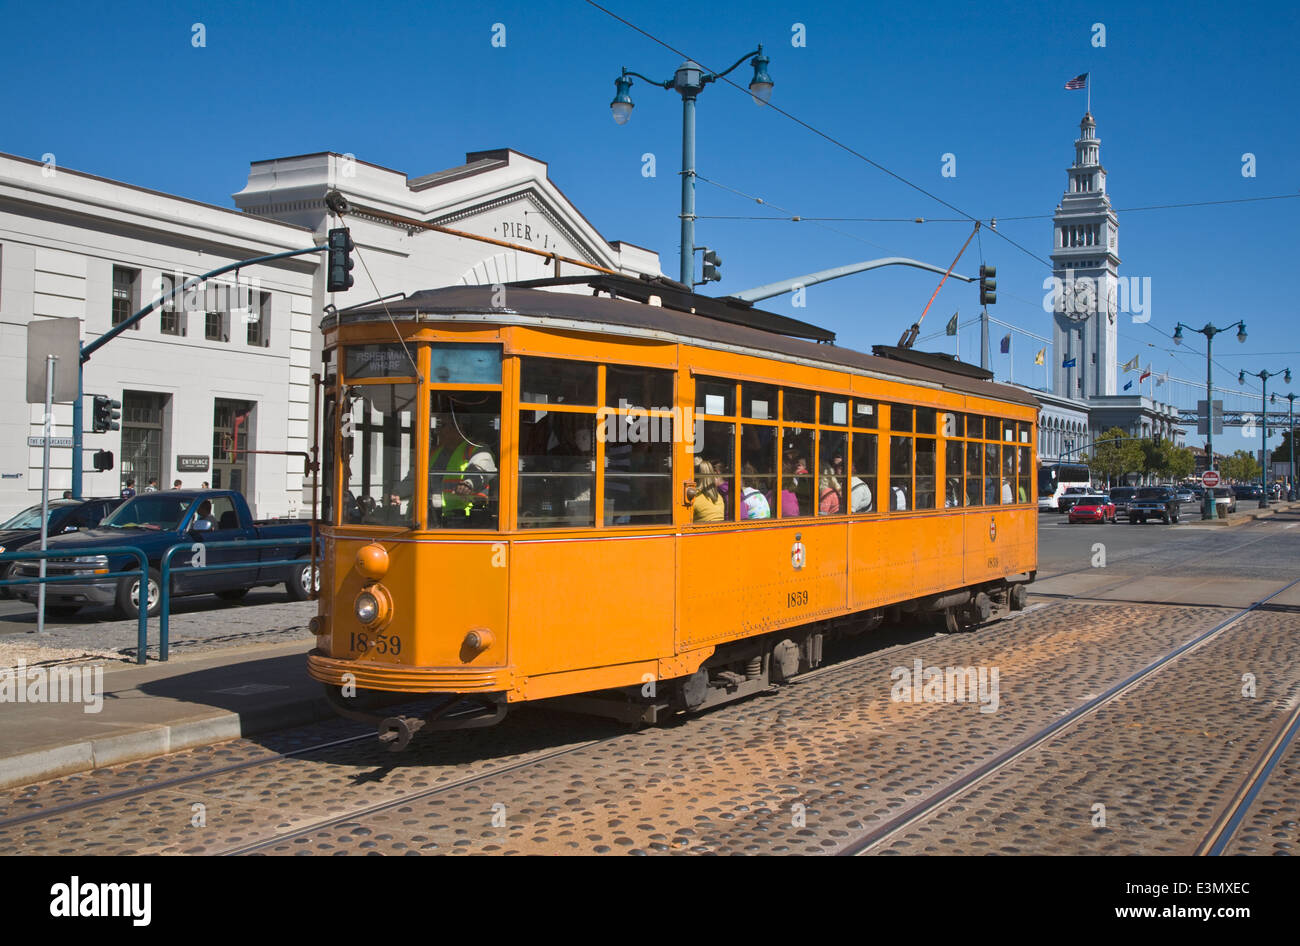 A historical CABLE CAR runs along the tracks in front of PIER 3 and the FERRY BUILDING on THE EMBARCADERO - SAN FRANCISCO, CALIF Stock Photo